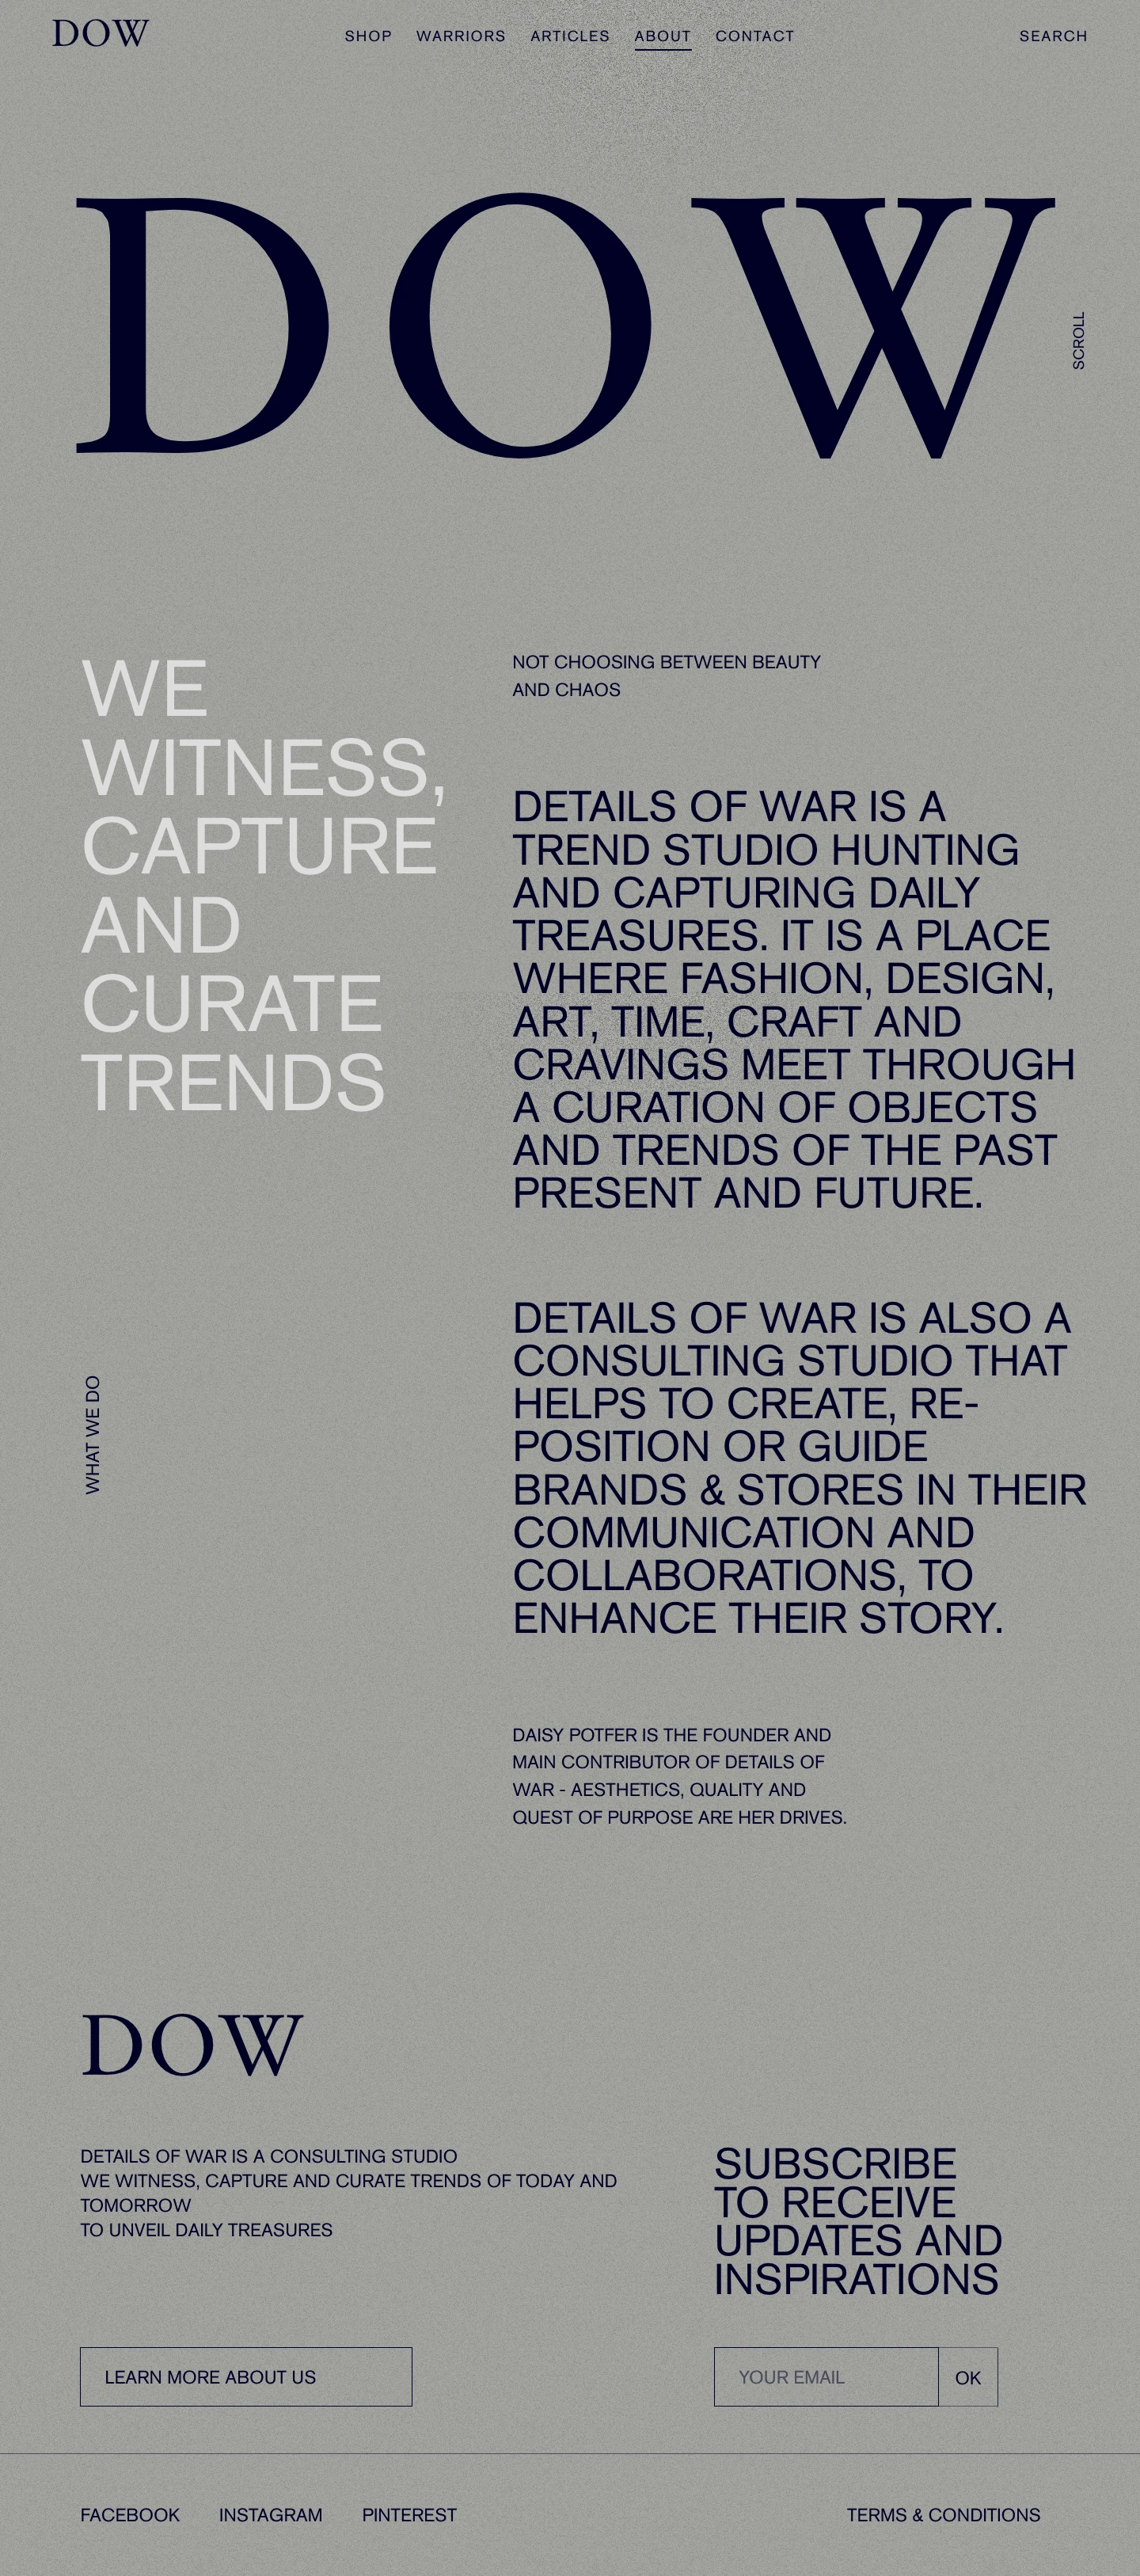 Details of war Landing Page Example: Details of war is a consulting studio. We witness, capture and curate trends of today and tomorrow.